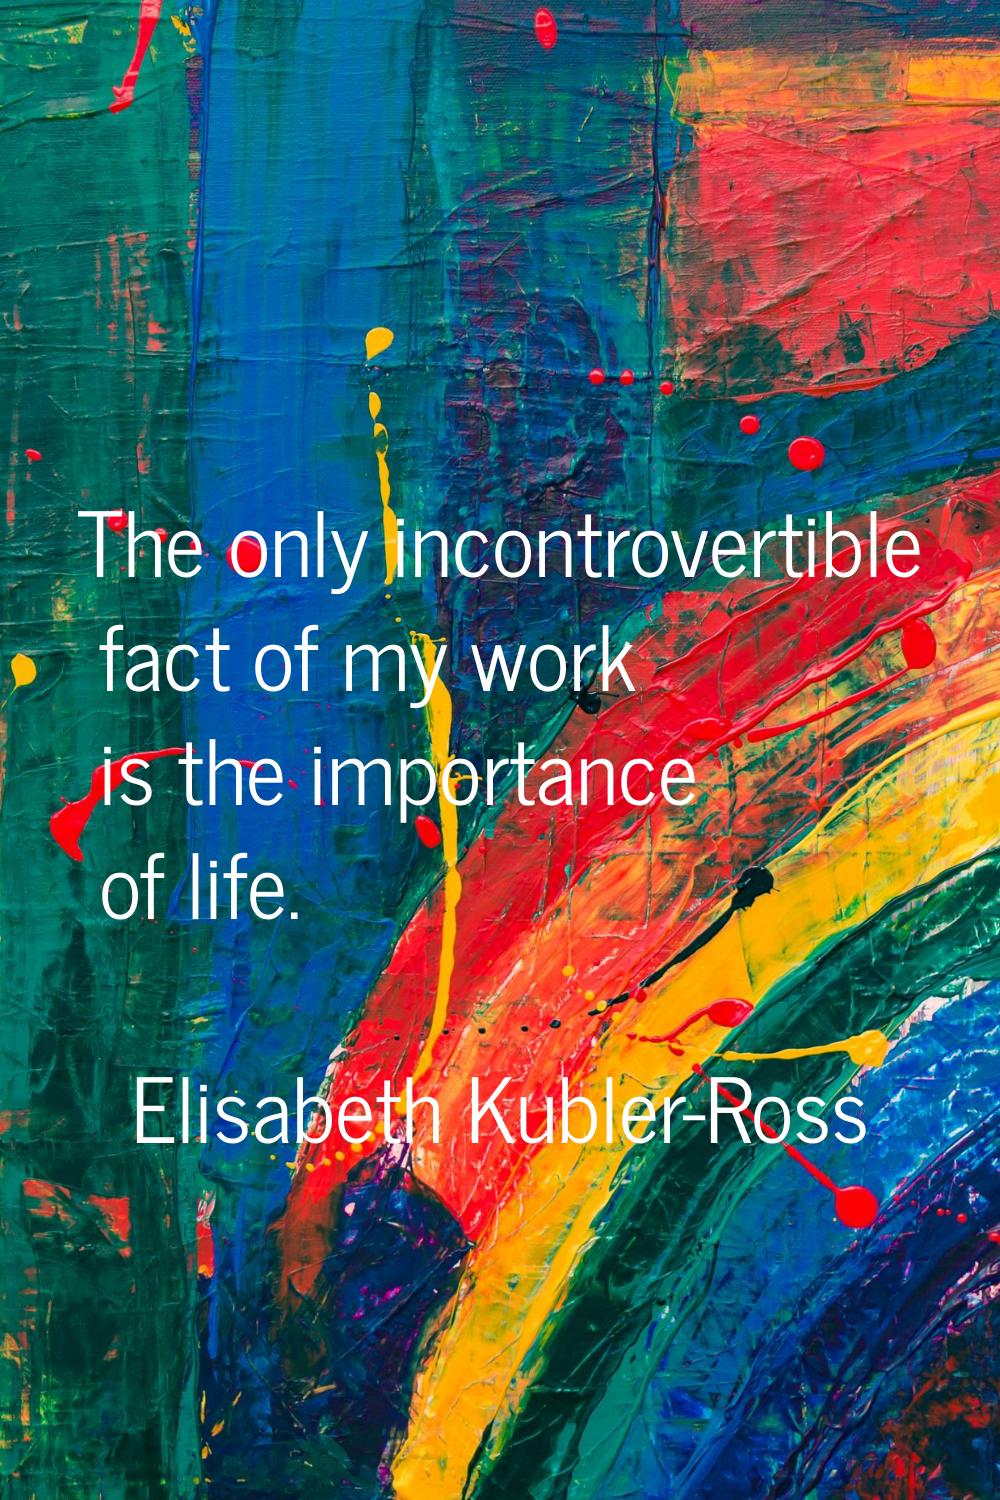 The only incontrovertible fact of my work is the importance of life.